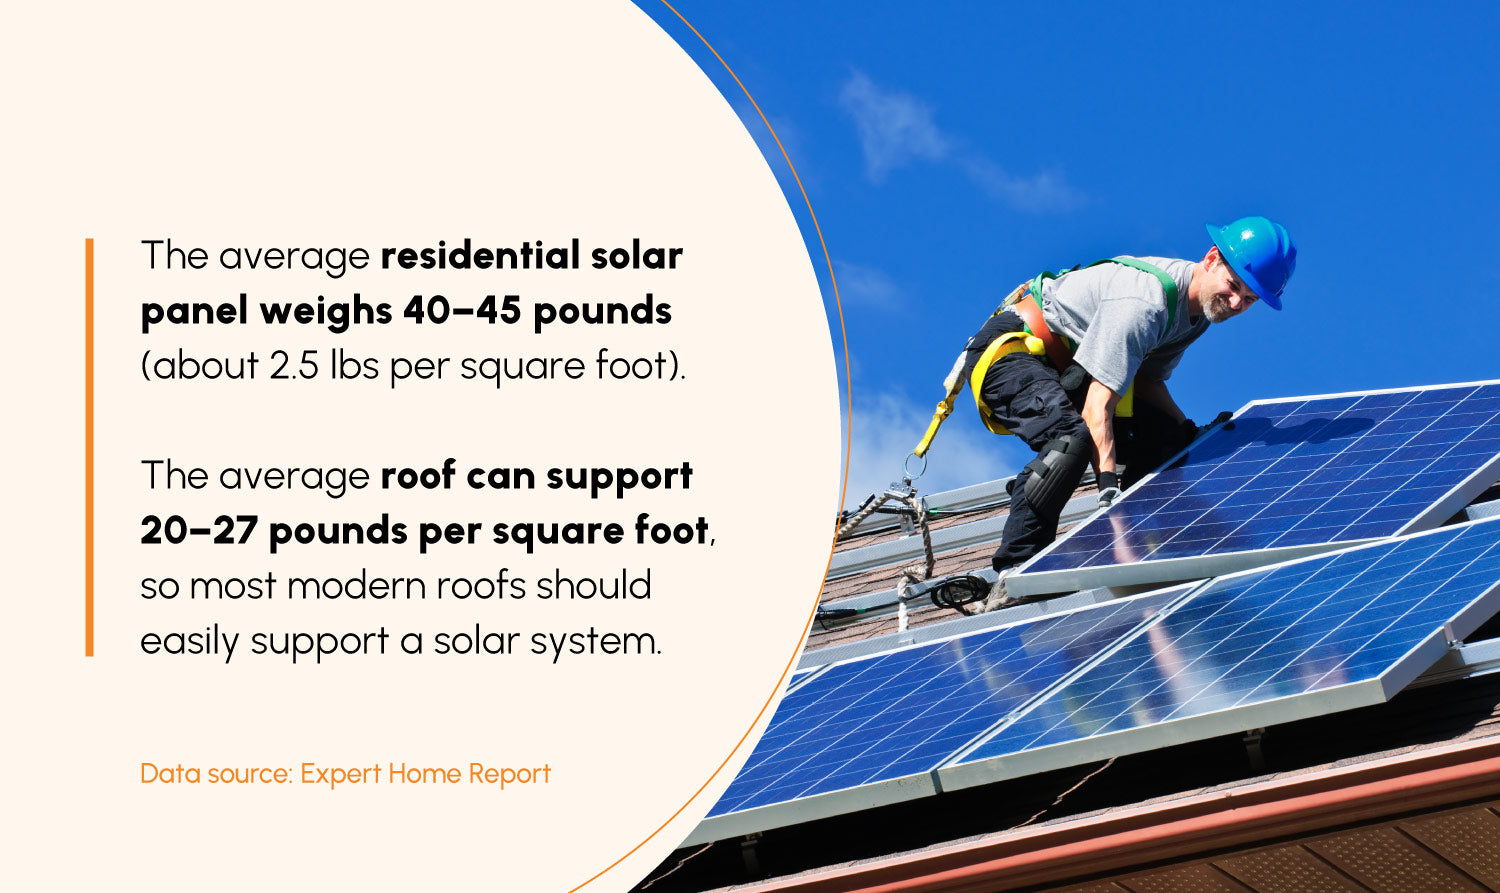 Two data points showing that most modern roofs should support the weight of a solar system